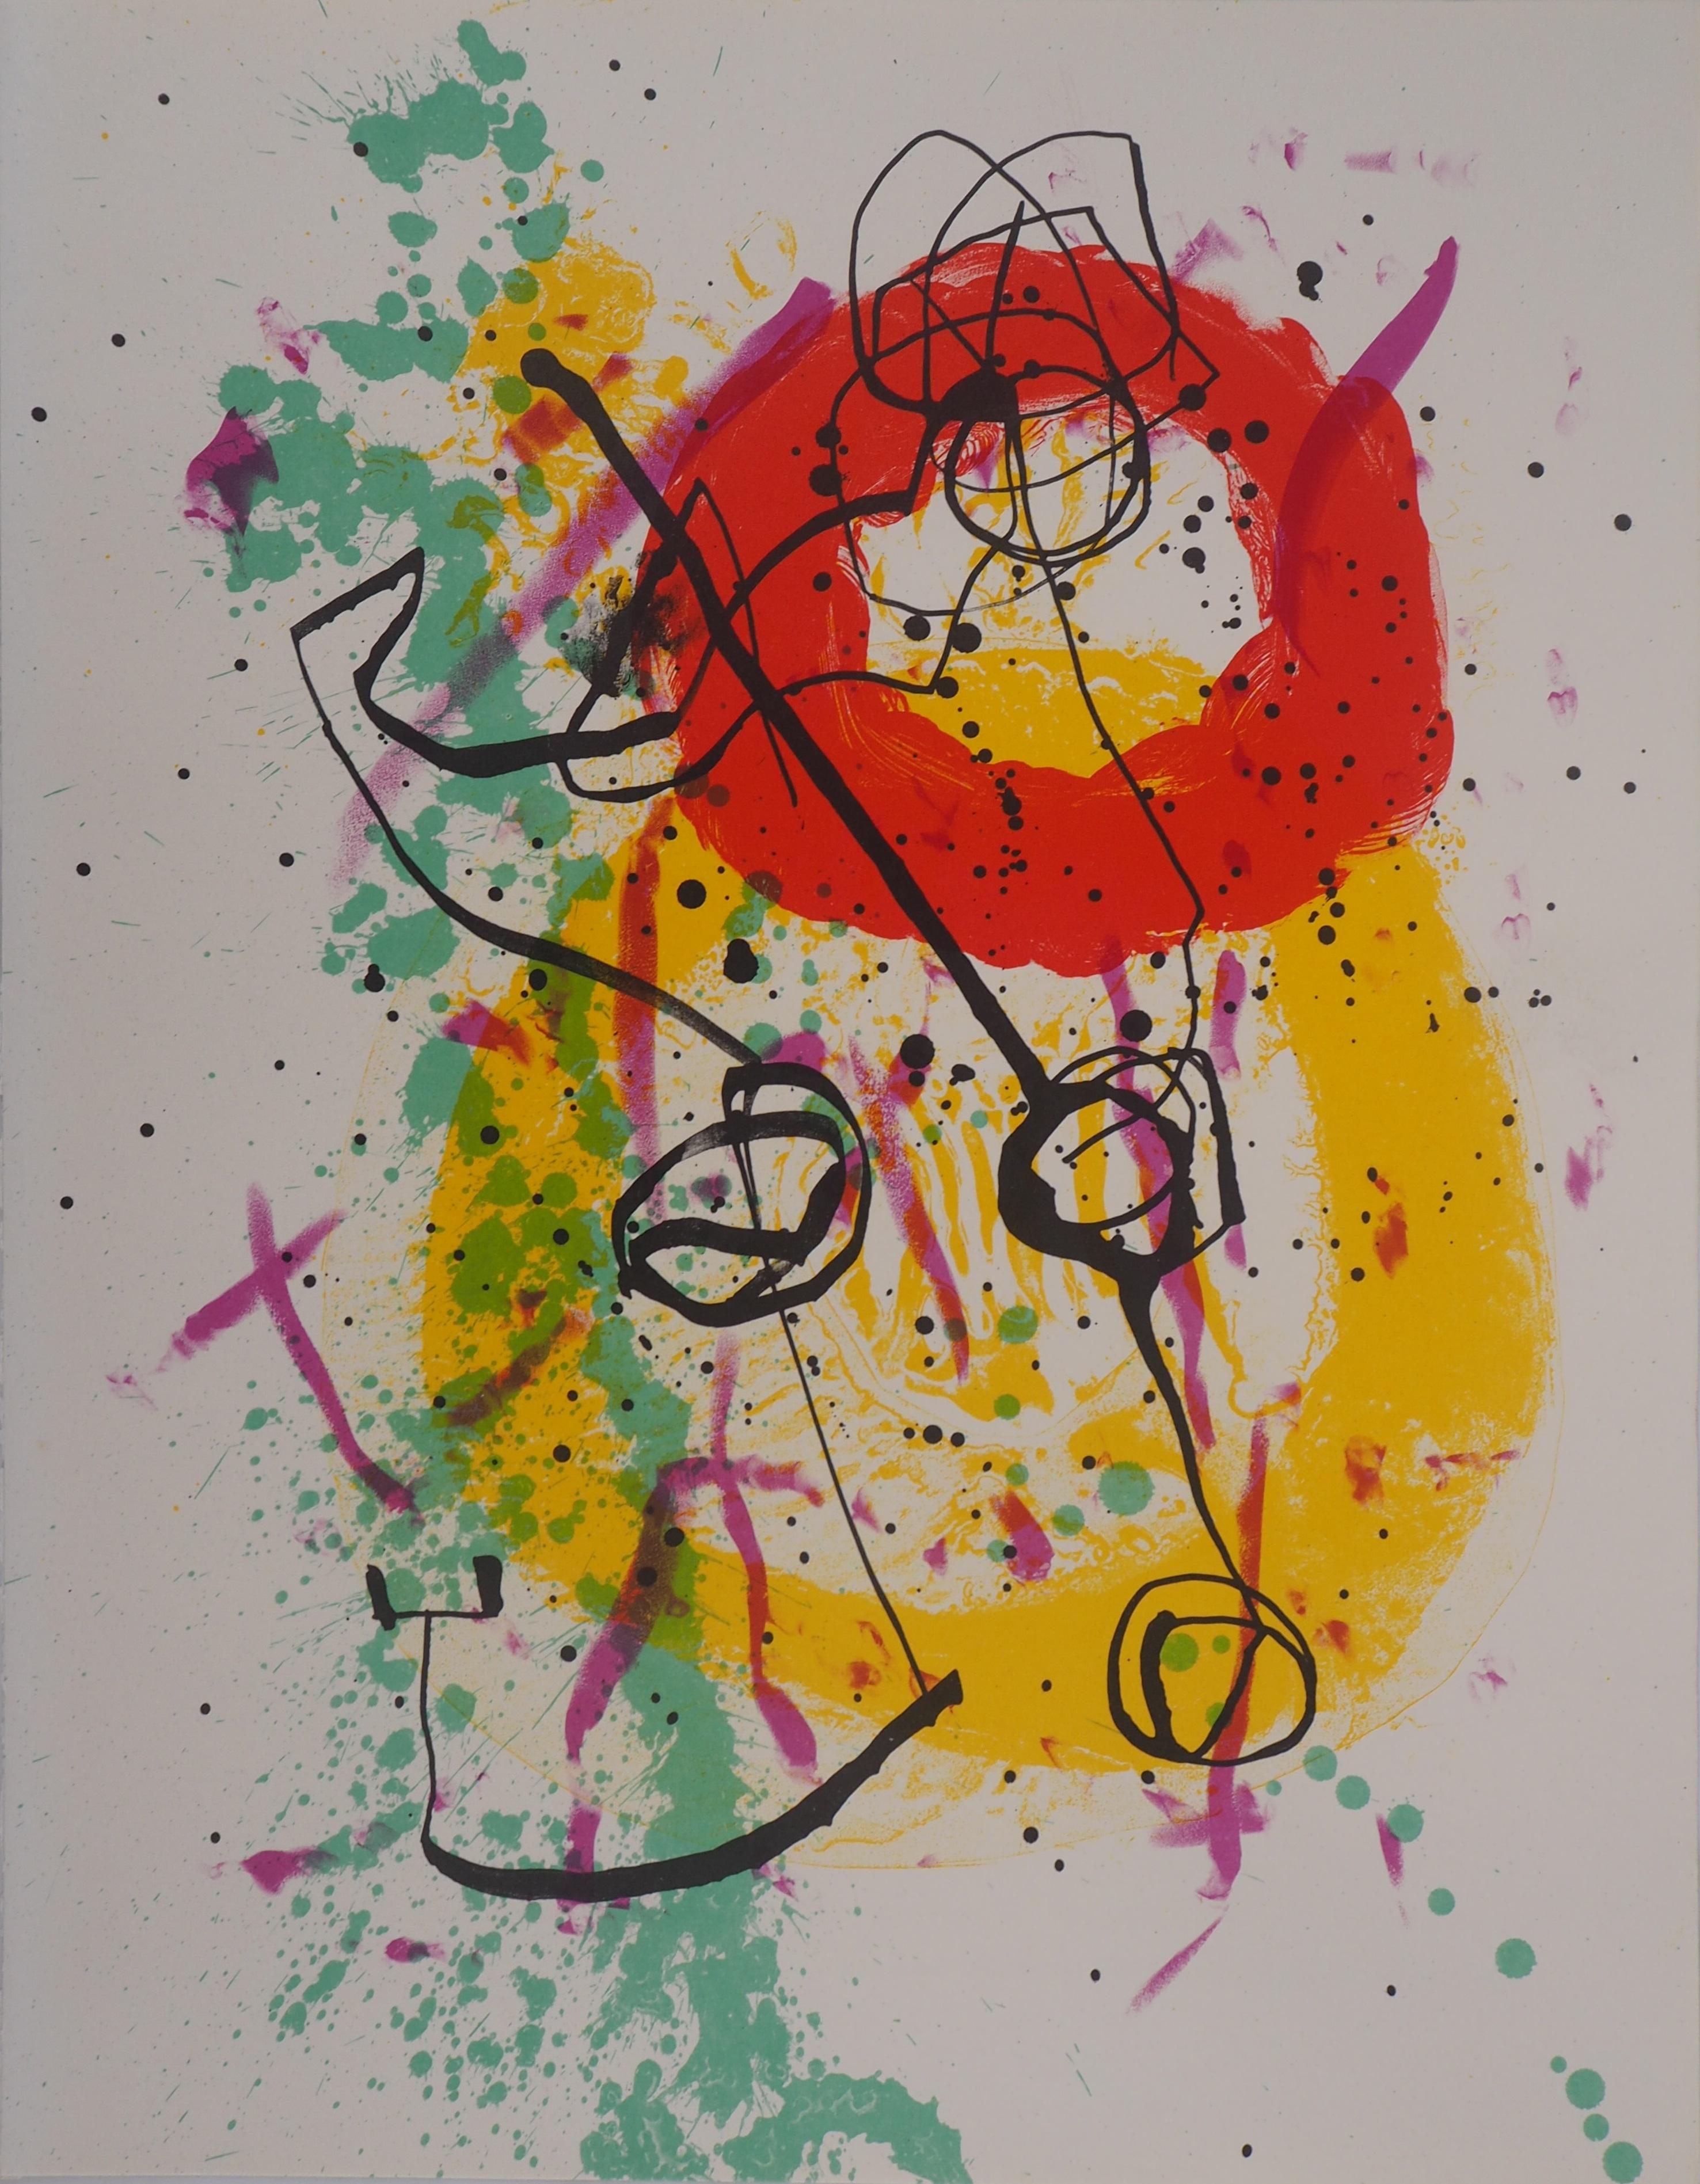 Joan Miró Abstract Print - Composition with red and yellow circles - Original lithograph (Maeght #206)